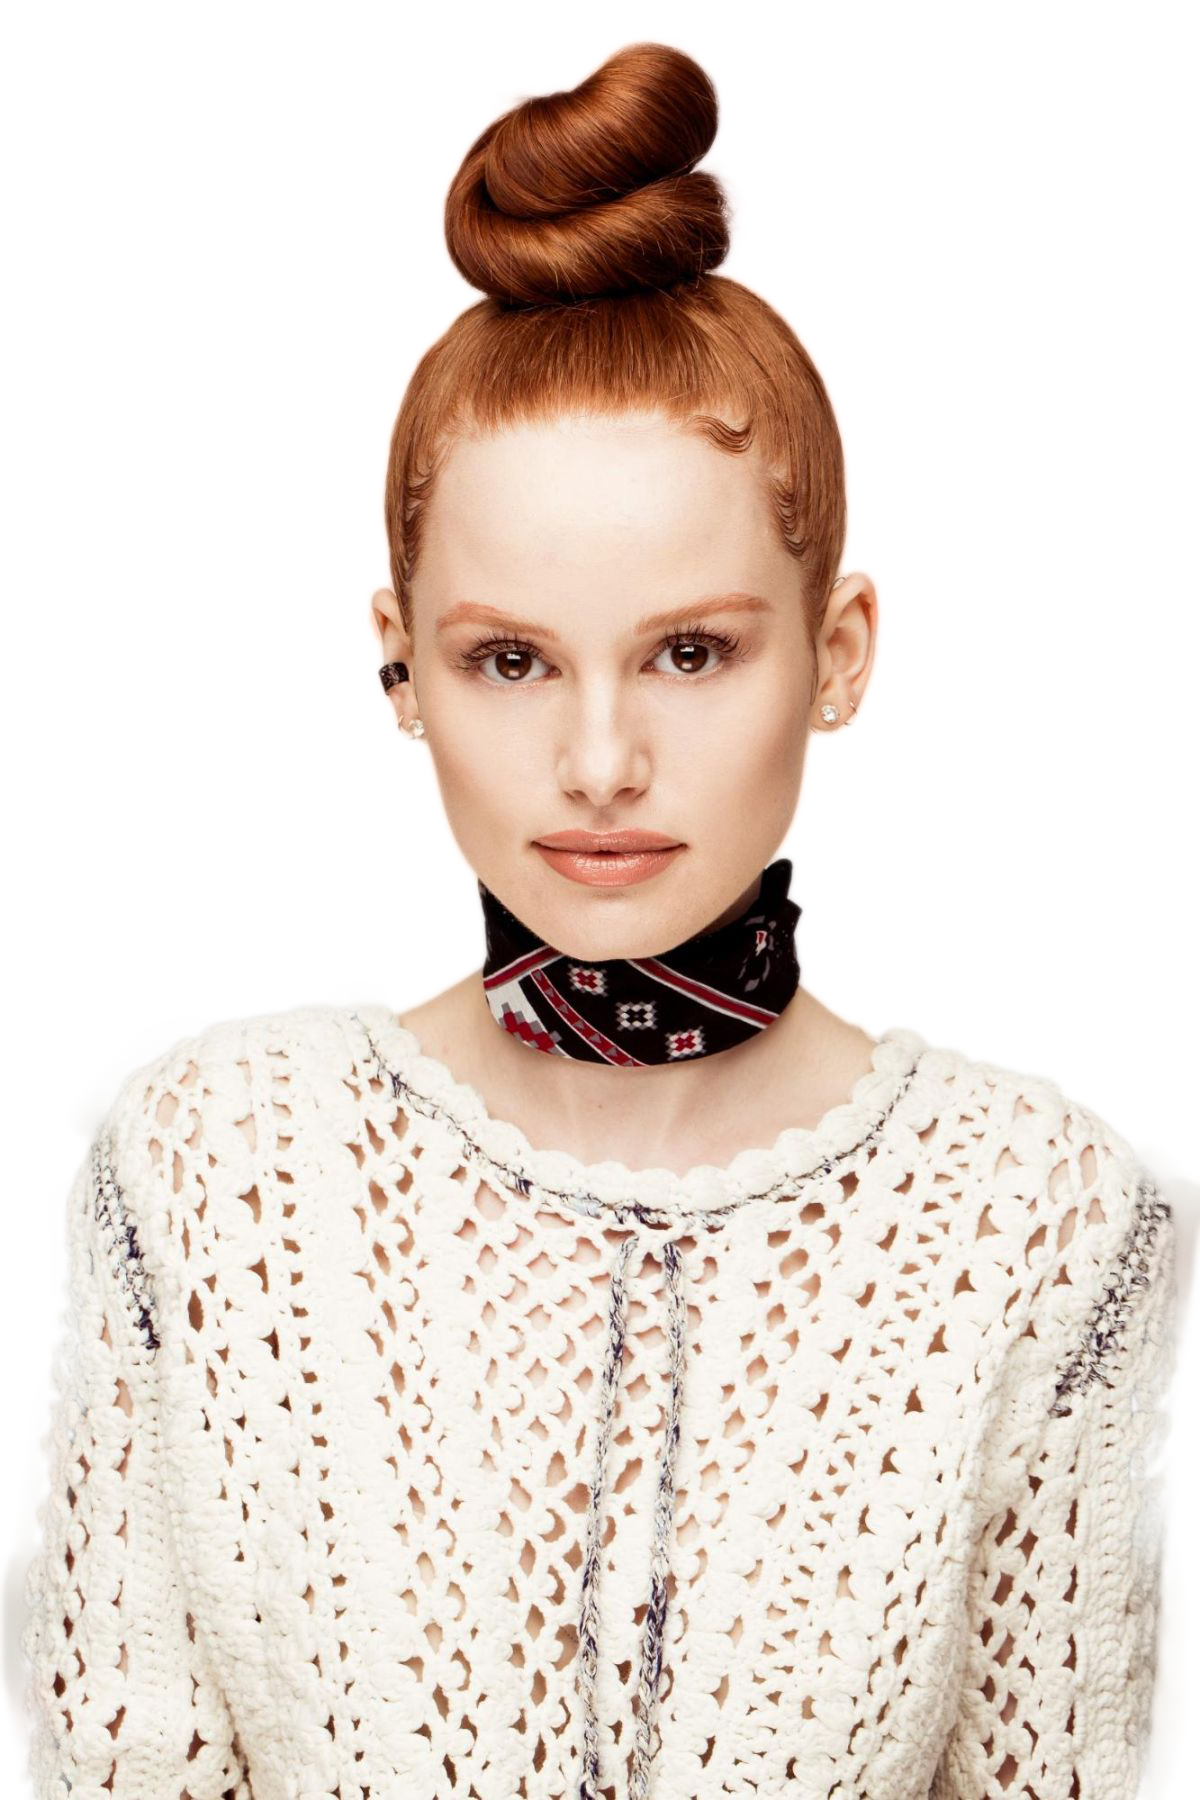 Madelaine Petsch PNG Image